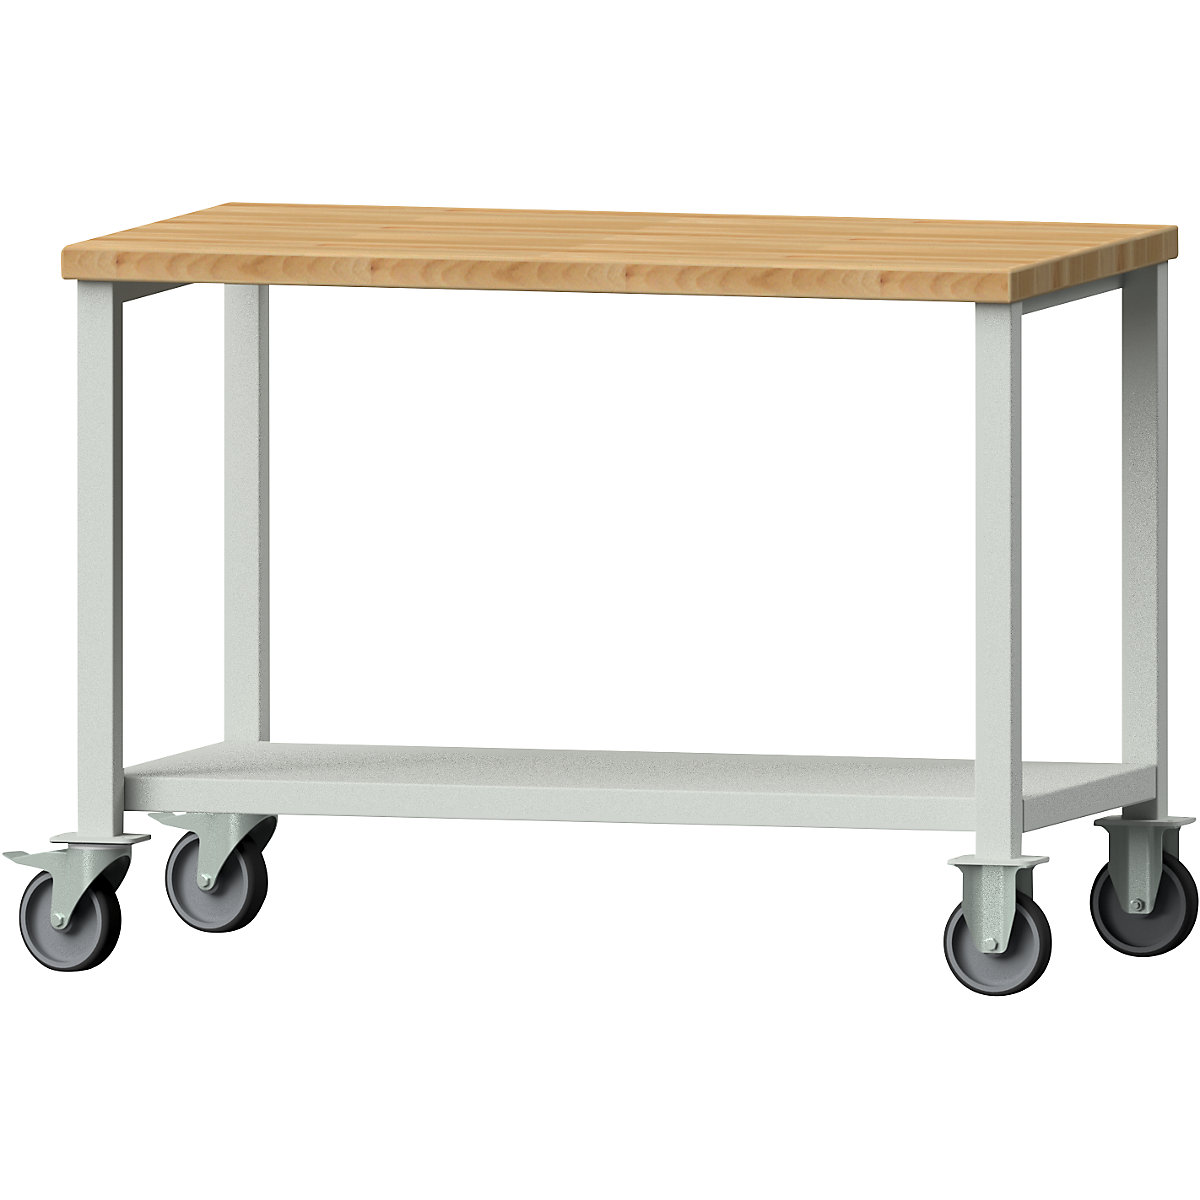 Compact workbench – ANKE, width 1140 mm, with shelf, mobile-2